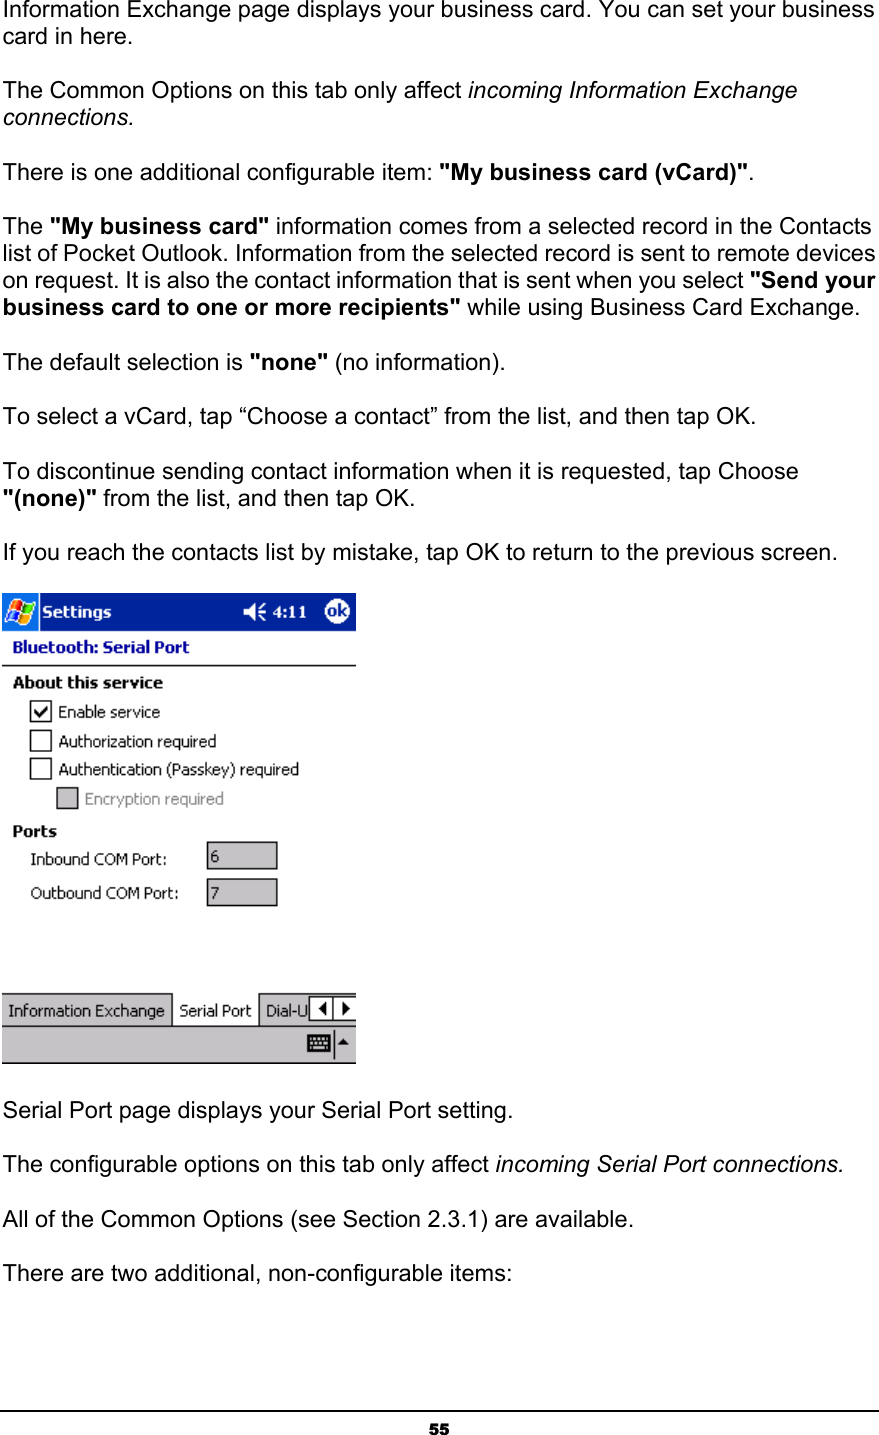   55Information Exchange page displays your business card. You can set your business card in here.  The Common Options on this tab only affect incoming Information Exchange connections. There is one additional configurable item: &quot;My business card (vCard)&quot;. The &quot;My business card&quot; information comes from a selected record in the Contacts list of Pocket Outlook. Information from the selected record is sent to remote devices on request. It is also the contact information that is sent when you select &quot;Send your business card to one or more recipients&quot; while using Business Card Exchange. The default selection is &quot;none&quot; (no information). To select a vCard, tap “Choose a contact” from the list, and then tap OK. To discontinue sending contact information when it is requested, tap Choose &quot;(none)&quot; from the list, and then tap OK. If you reach the contacts list by mistake, tap OK to return to the previous screen.   Serial Port page displays your Serial Port setting.  The configurable options on this tab only affect incoming Serial Port connections. All of the Common Options (see Section 2.3.1) are available. There are two additional, non-configurable items: 